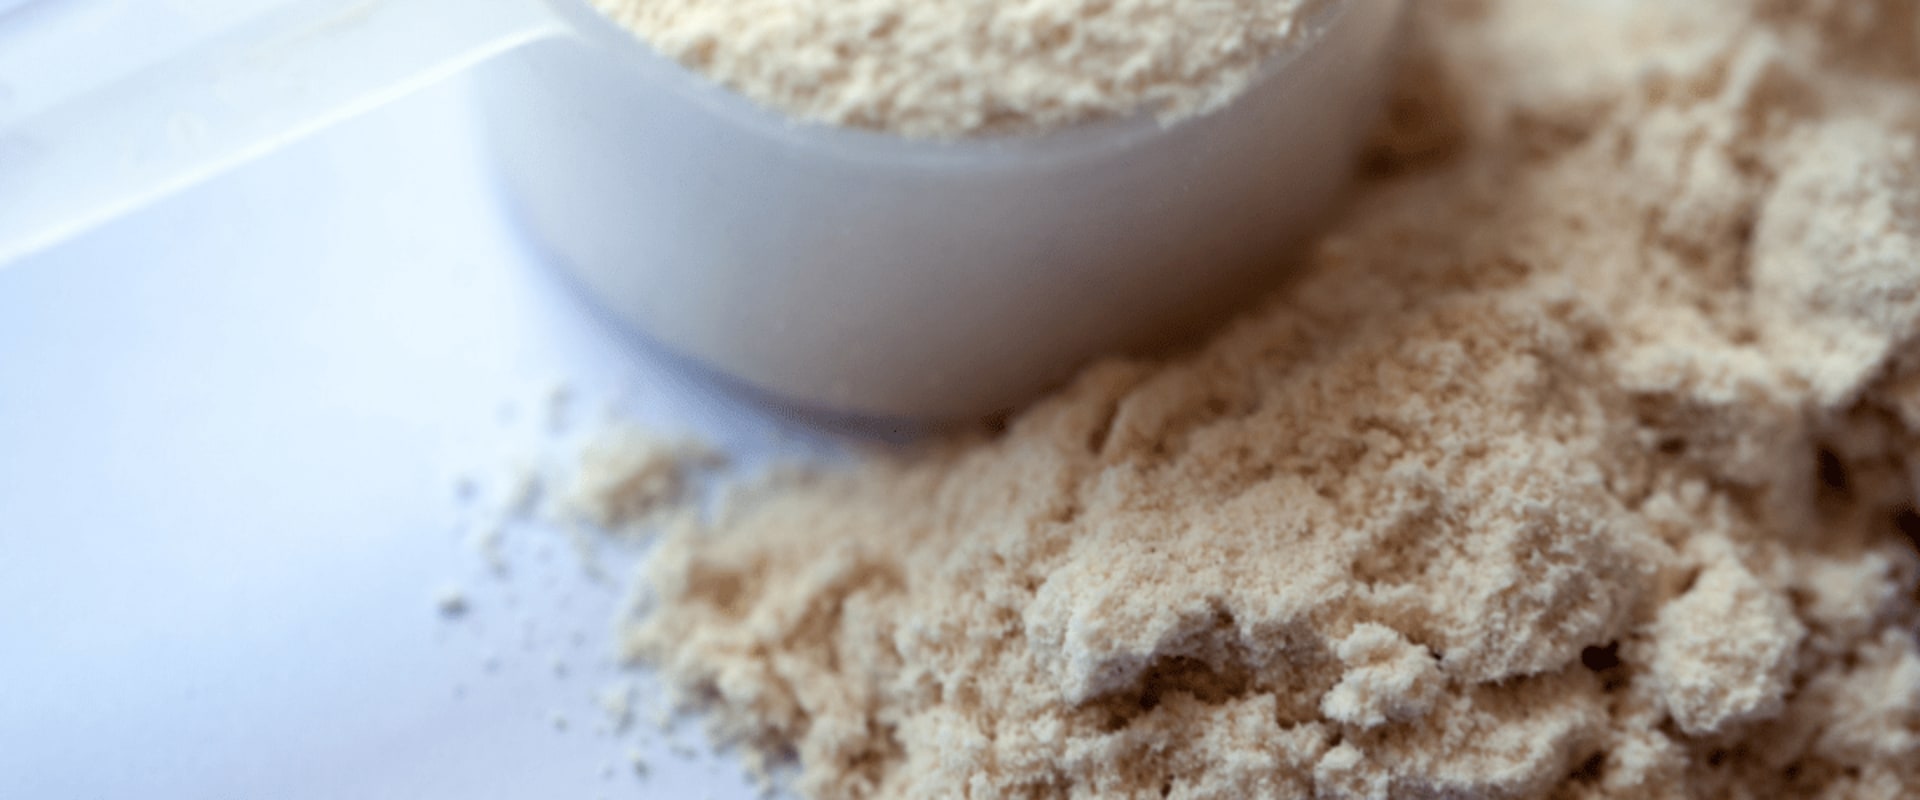 Which whey protein is best for diabetic patient?